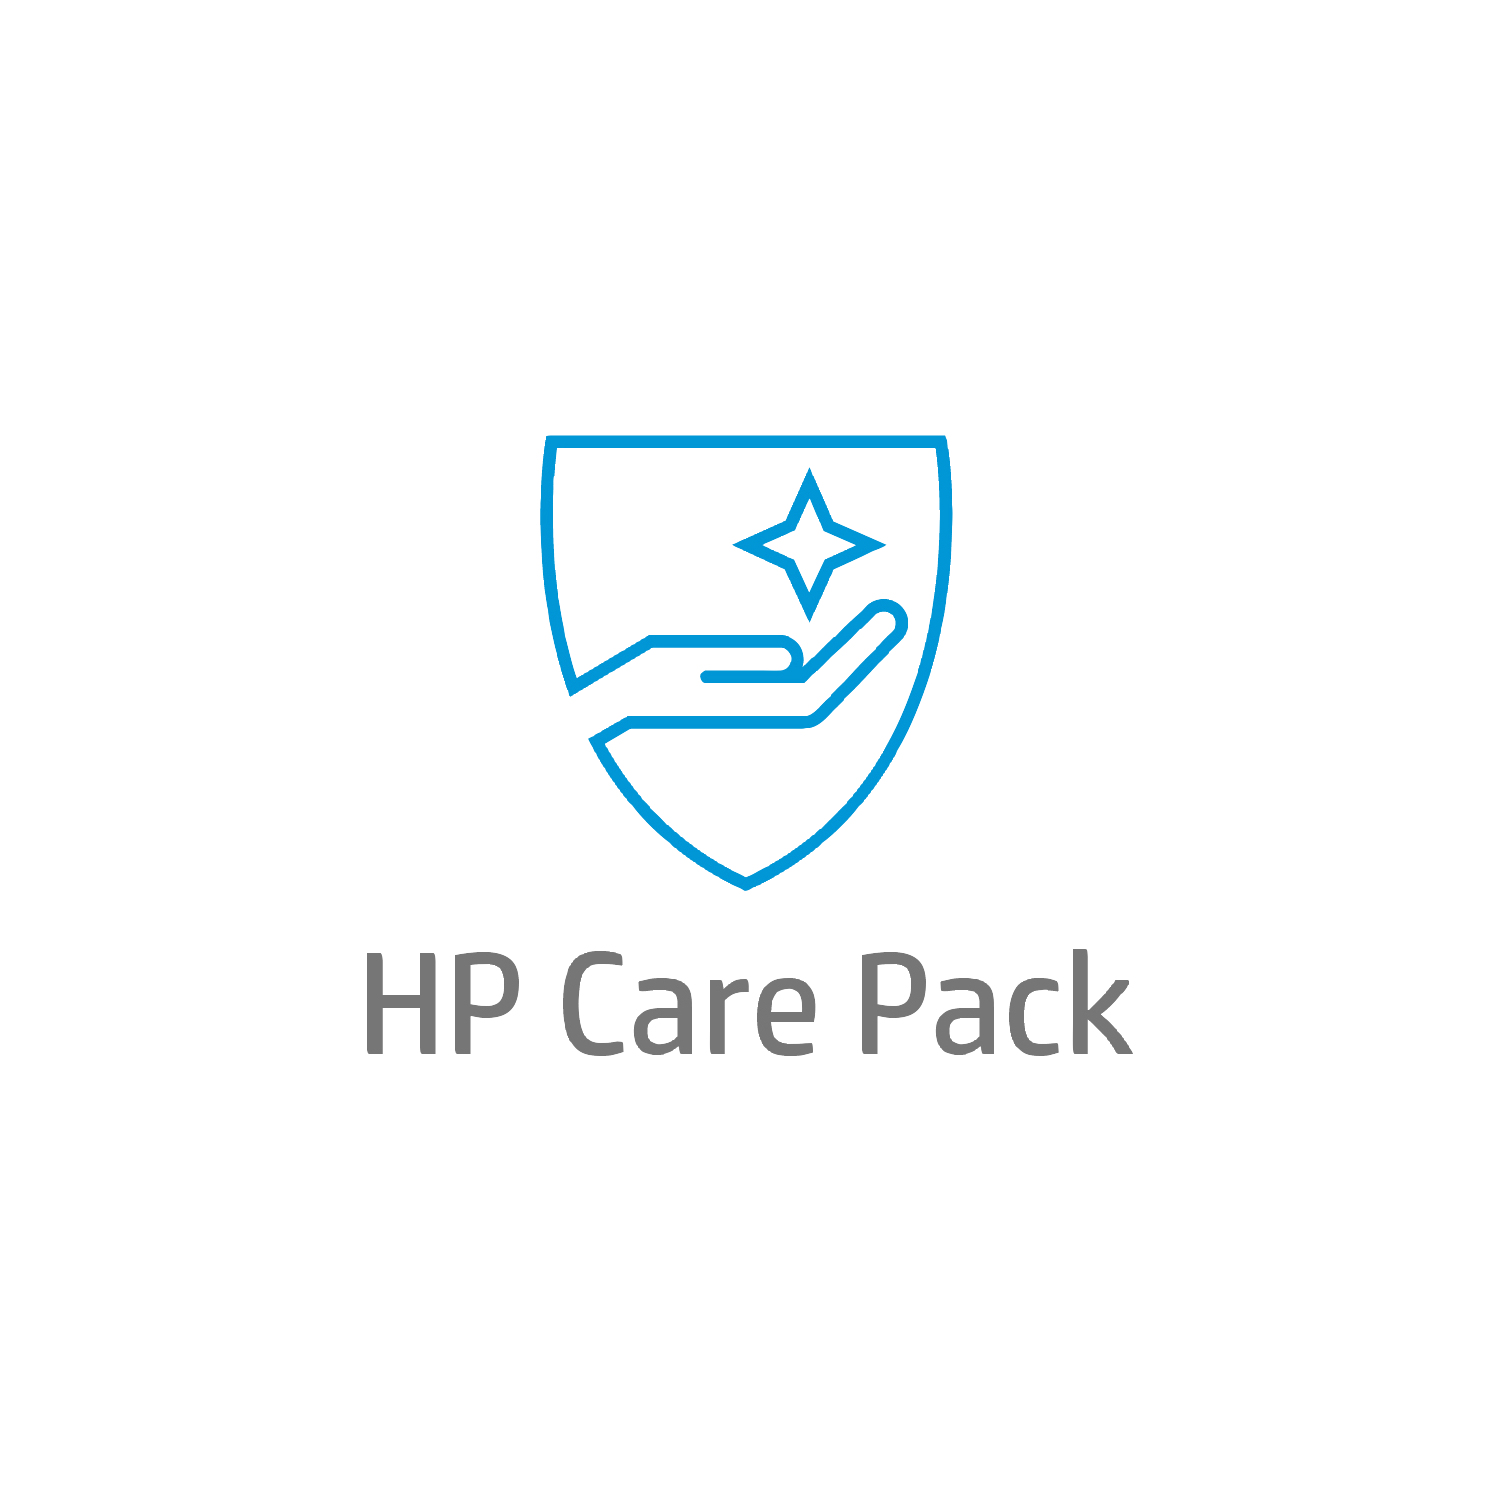 HP 5y 9x5 Workplace 2000-4999 License Support REQUIRED for ea. software lic. purchased